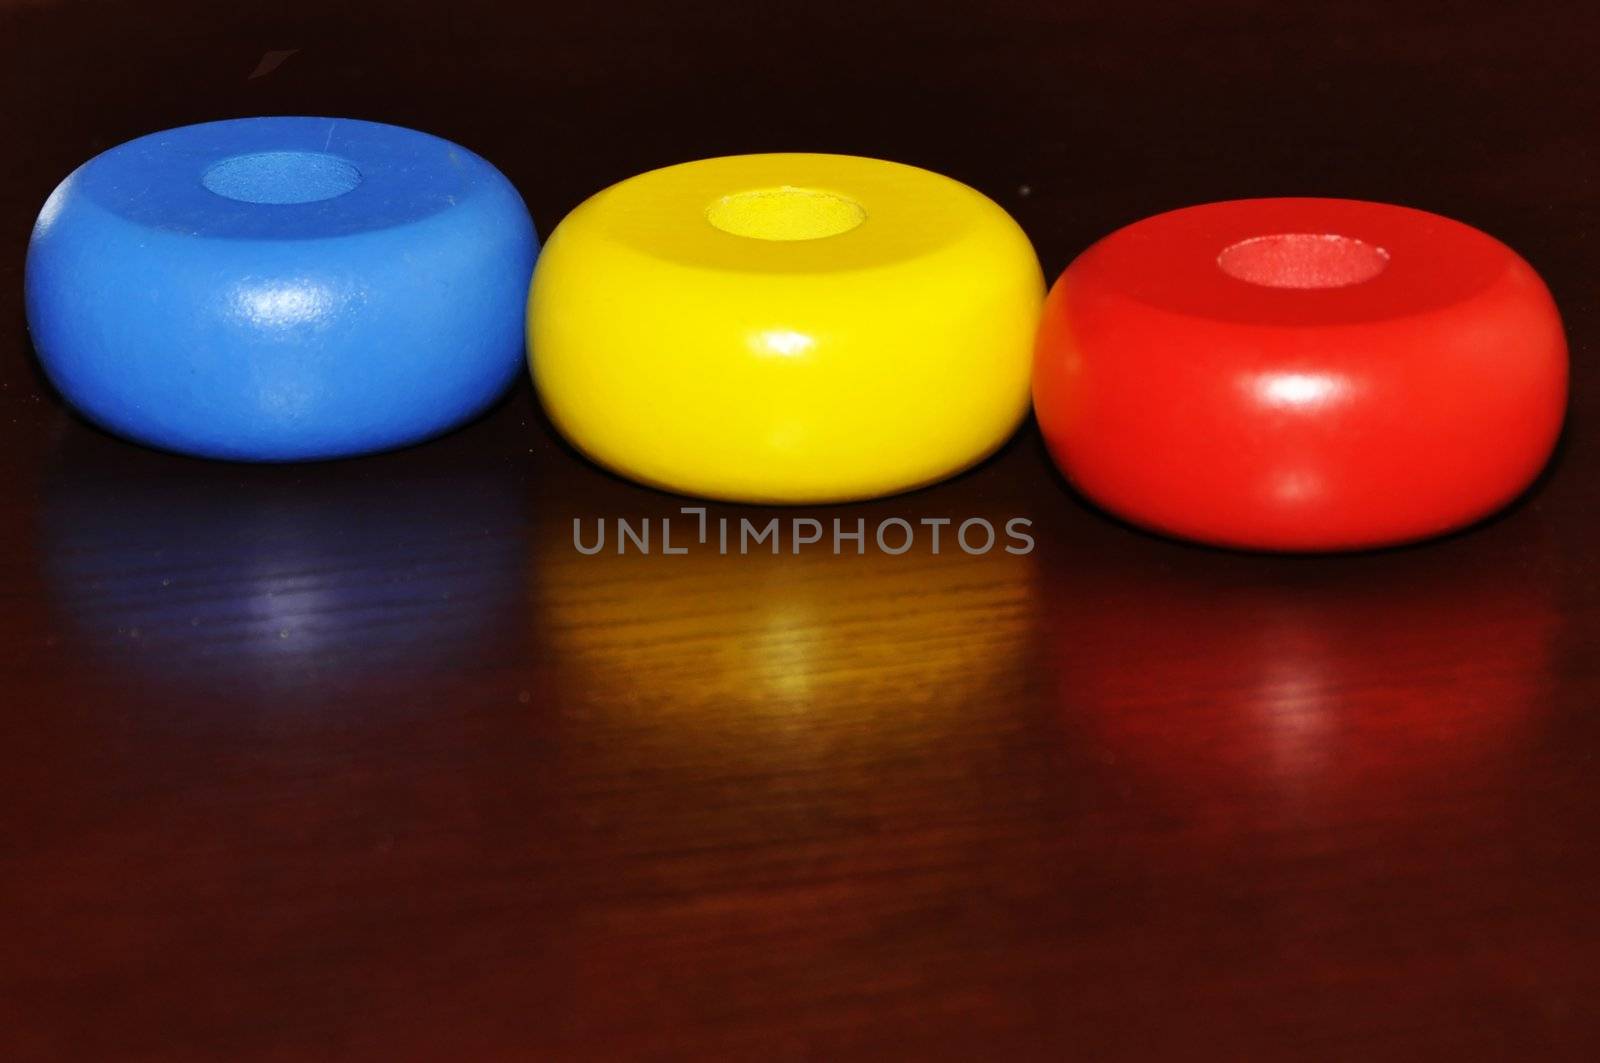 The colour subjects on a wooden surface